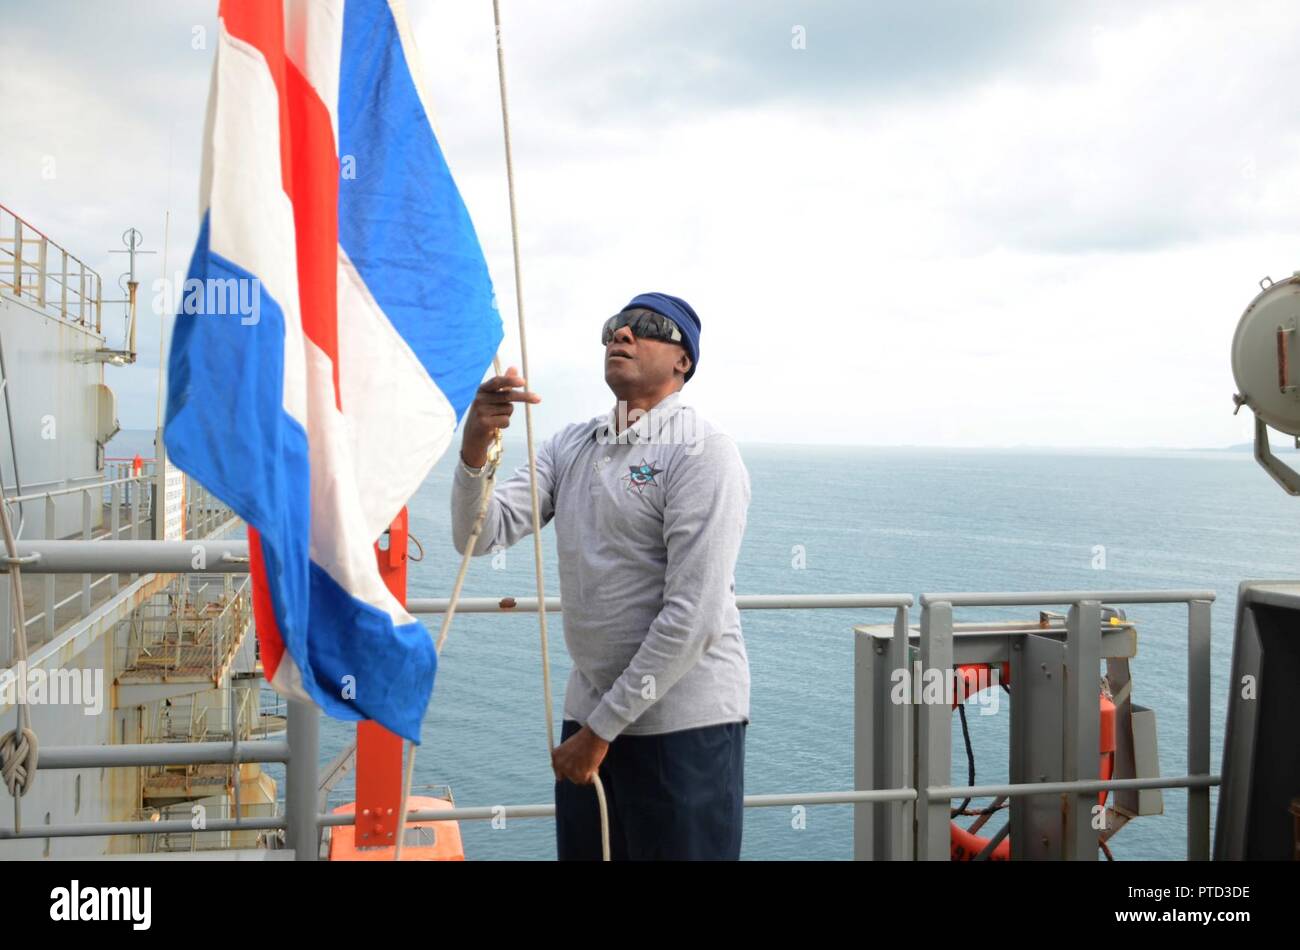 NOUMEA, New Caledonia (July 11, 2017) Willie Watkins, Able-Bodied Seaman aboard USNS Sacagawea (T-AKE 2), raises navigational flags during sea and anchor detail for the ships outboard journey from New Caledonia during Koa Moana 17, July 11. Koa Moana 17 is designed to improve theater security, and conduct aw enforcement and infantry training in the Pacific region in order to enhance interoperability with partner nations. Stock Photo